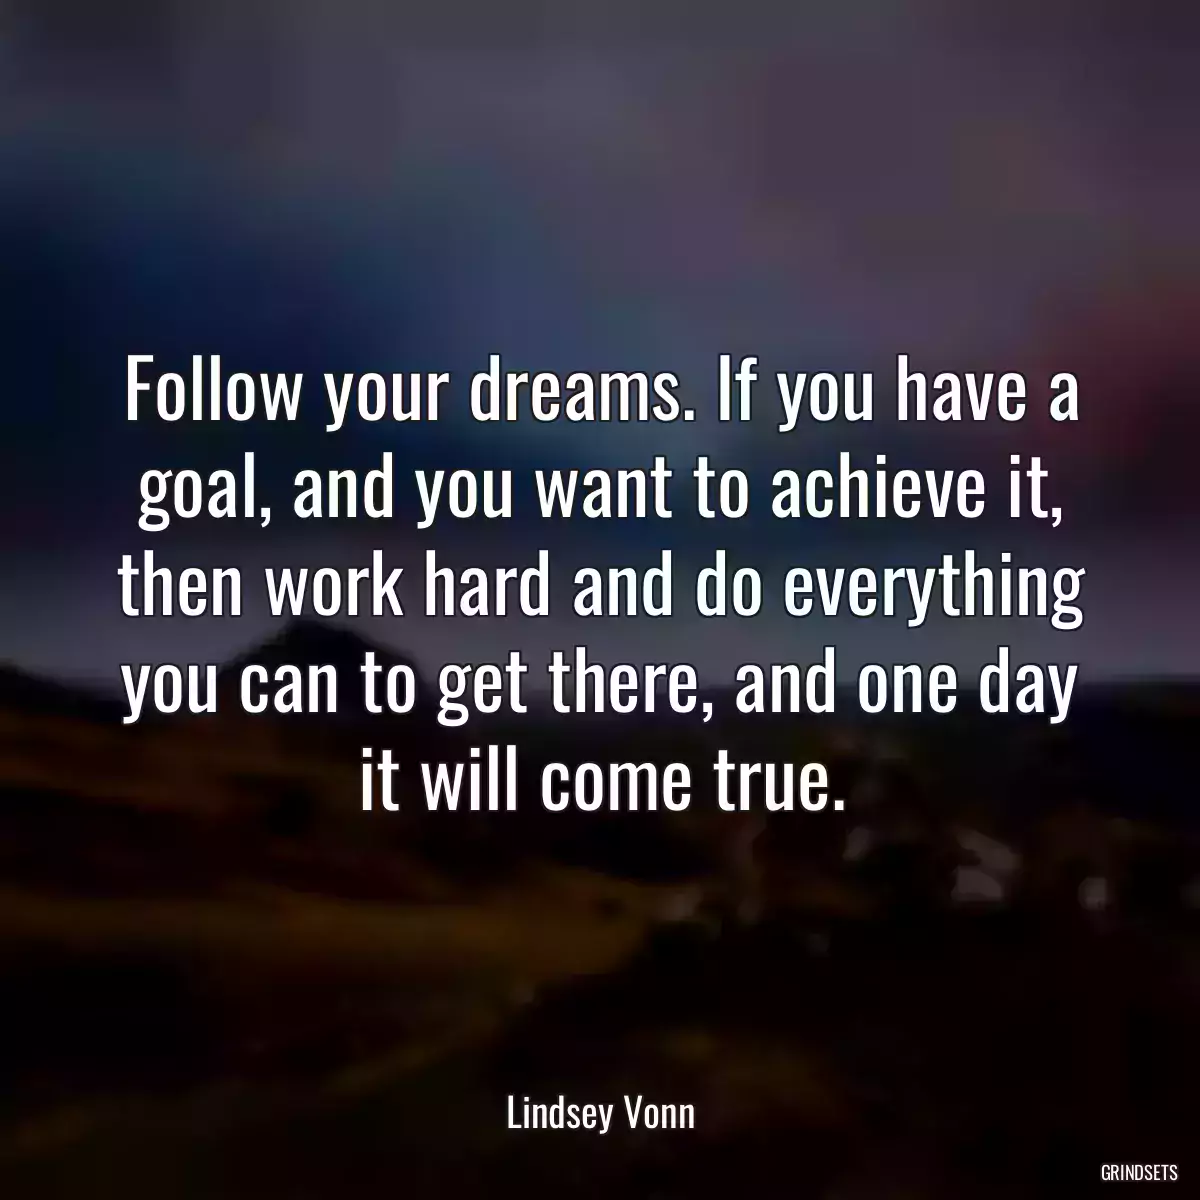 Follow your dreams. If you have a goal, and you want to achieve it, then work hard and do everything you can to get there, and one day it will come true.